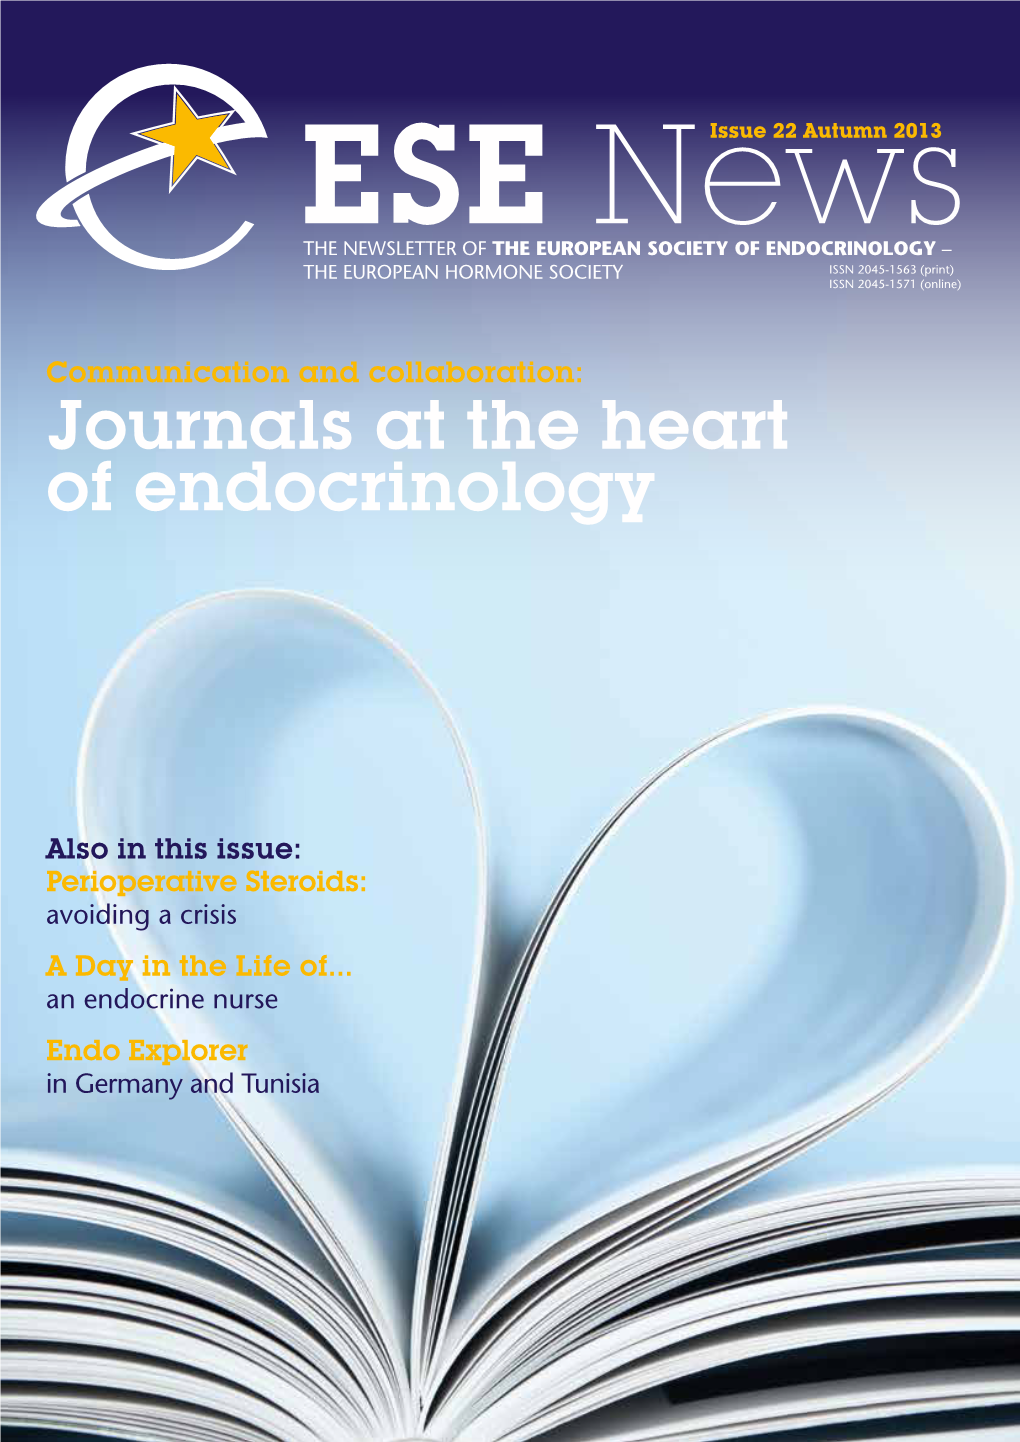 ESE Newsissue 22 Autumn 2013 the NEWSLETTER of the EUROPEAN SOCIETY of ENDOCRINOLOGY – the EUROPEAN HORMONE SOCIETY ISSN 2045-1563 (Print) ISSN 2045-1571 (Online)